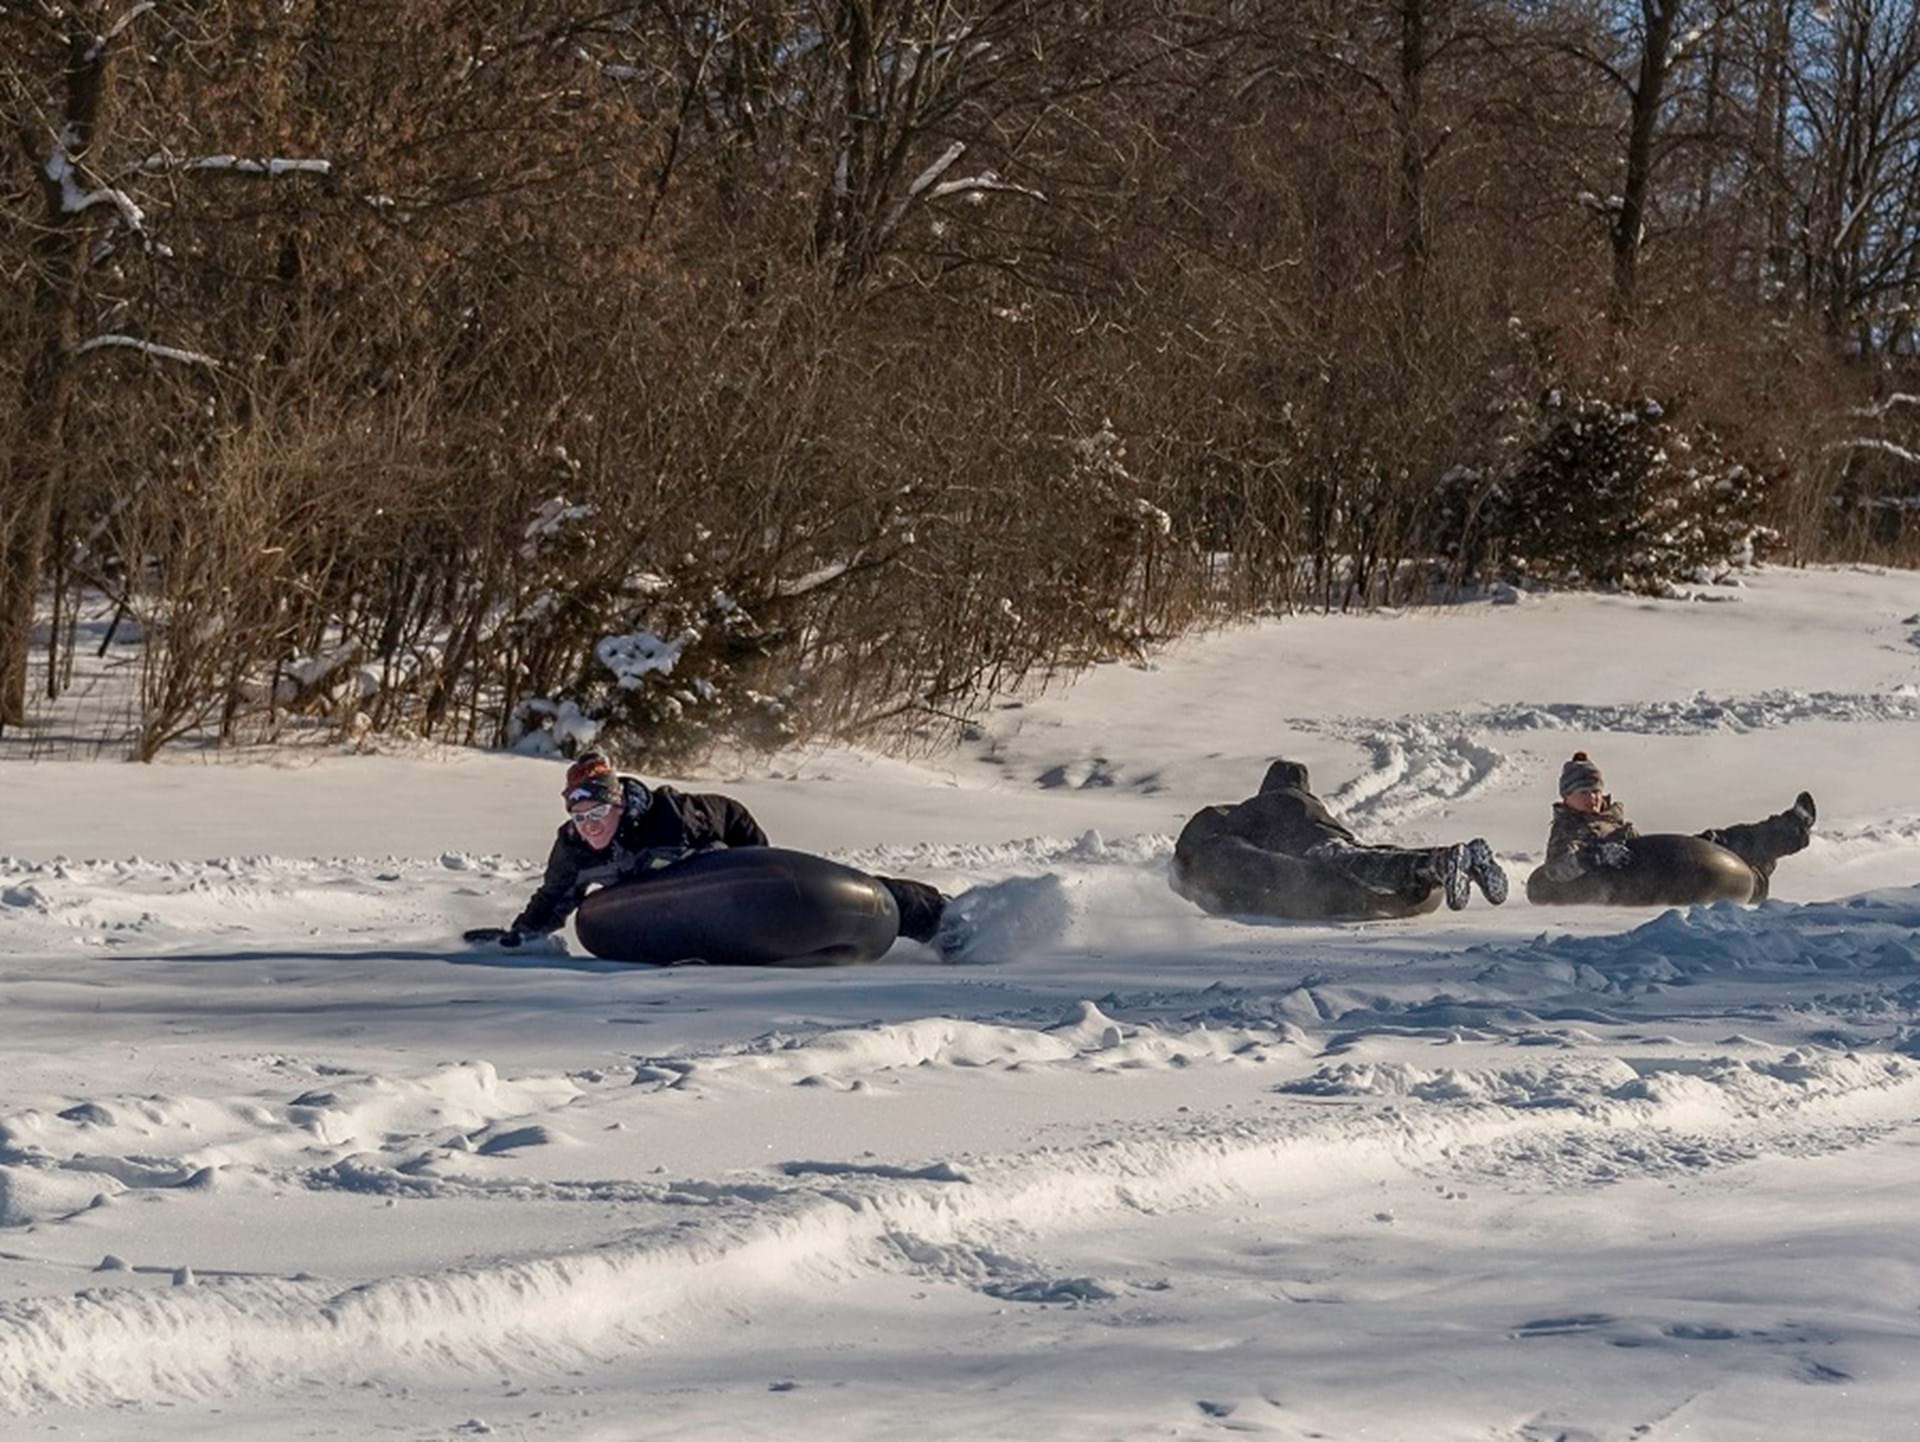 Tubing at Hillview Park